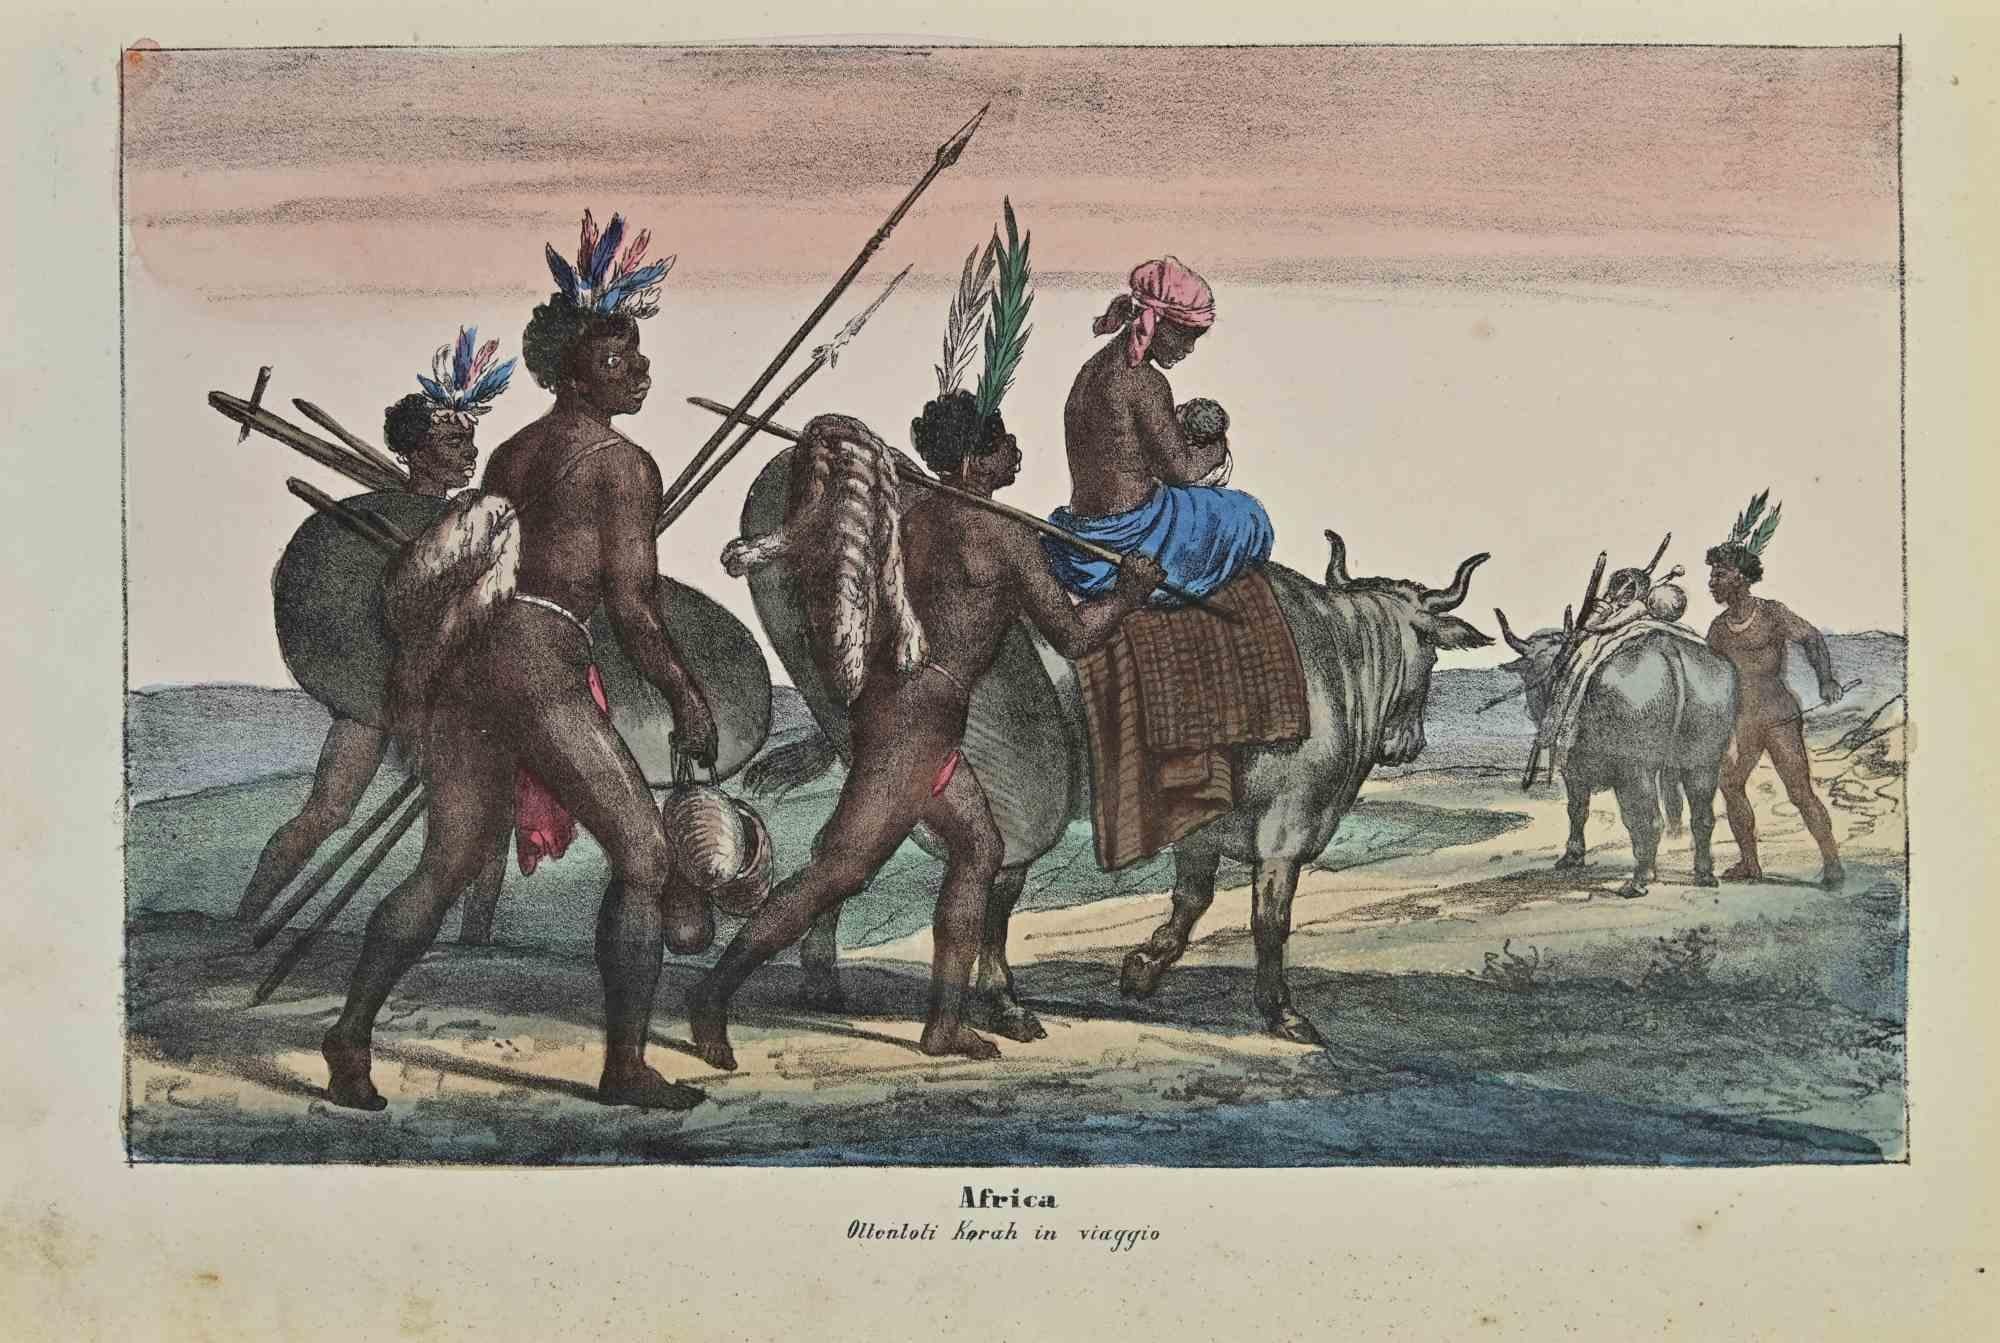 Ancient African Customs is a lithograph made by Auguste Wahlen in 1844.

Hand colored.

Good condition.

At the center of the artwork is the original title "Africa" and subtitle "Ottentoti Korah in viaggio".

The work is part of Suite Moeurs, usages